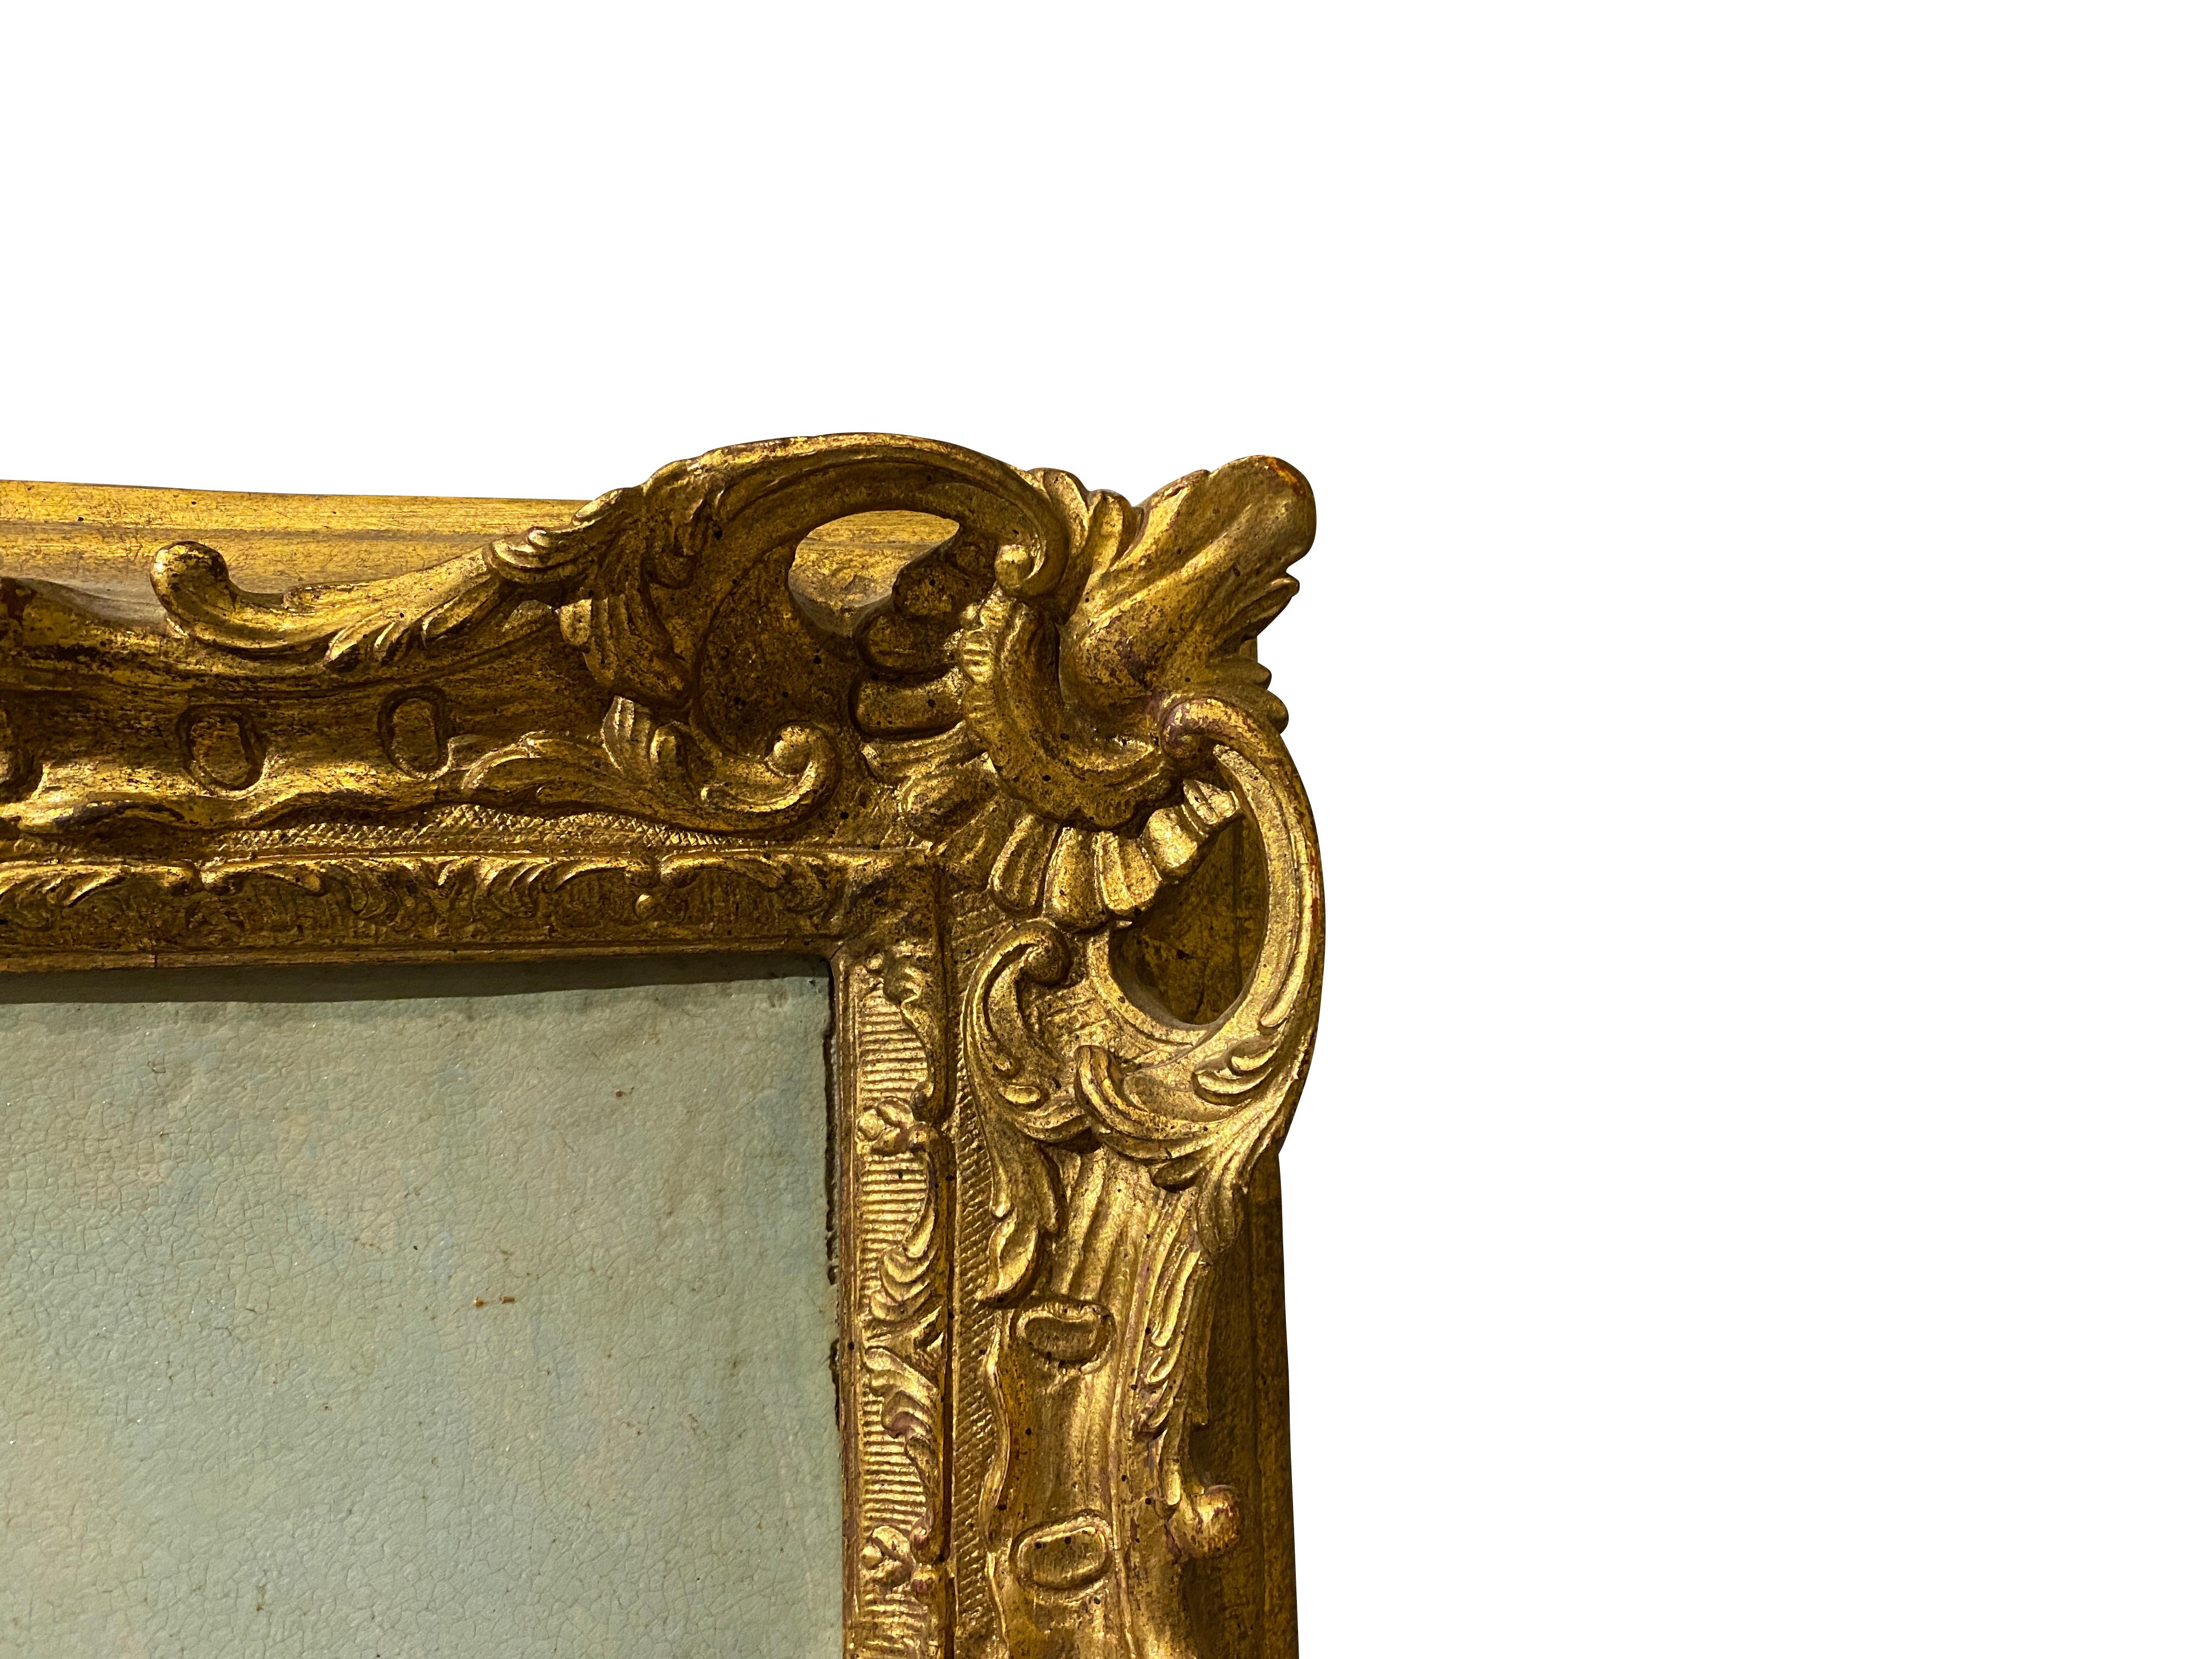 Well painted with scene of ancient ruins. In a carved gilt wood frame.